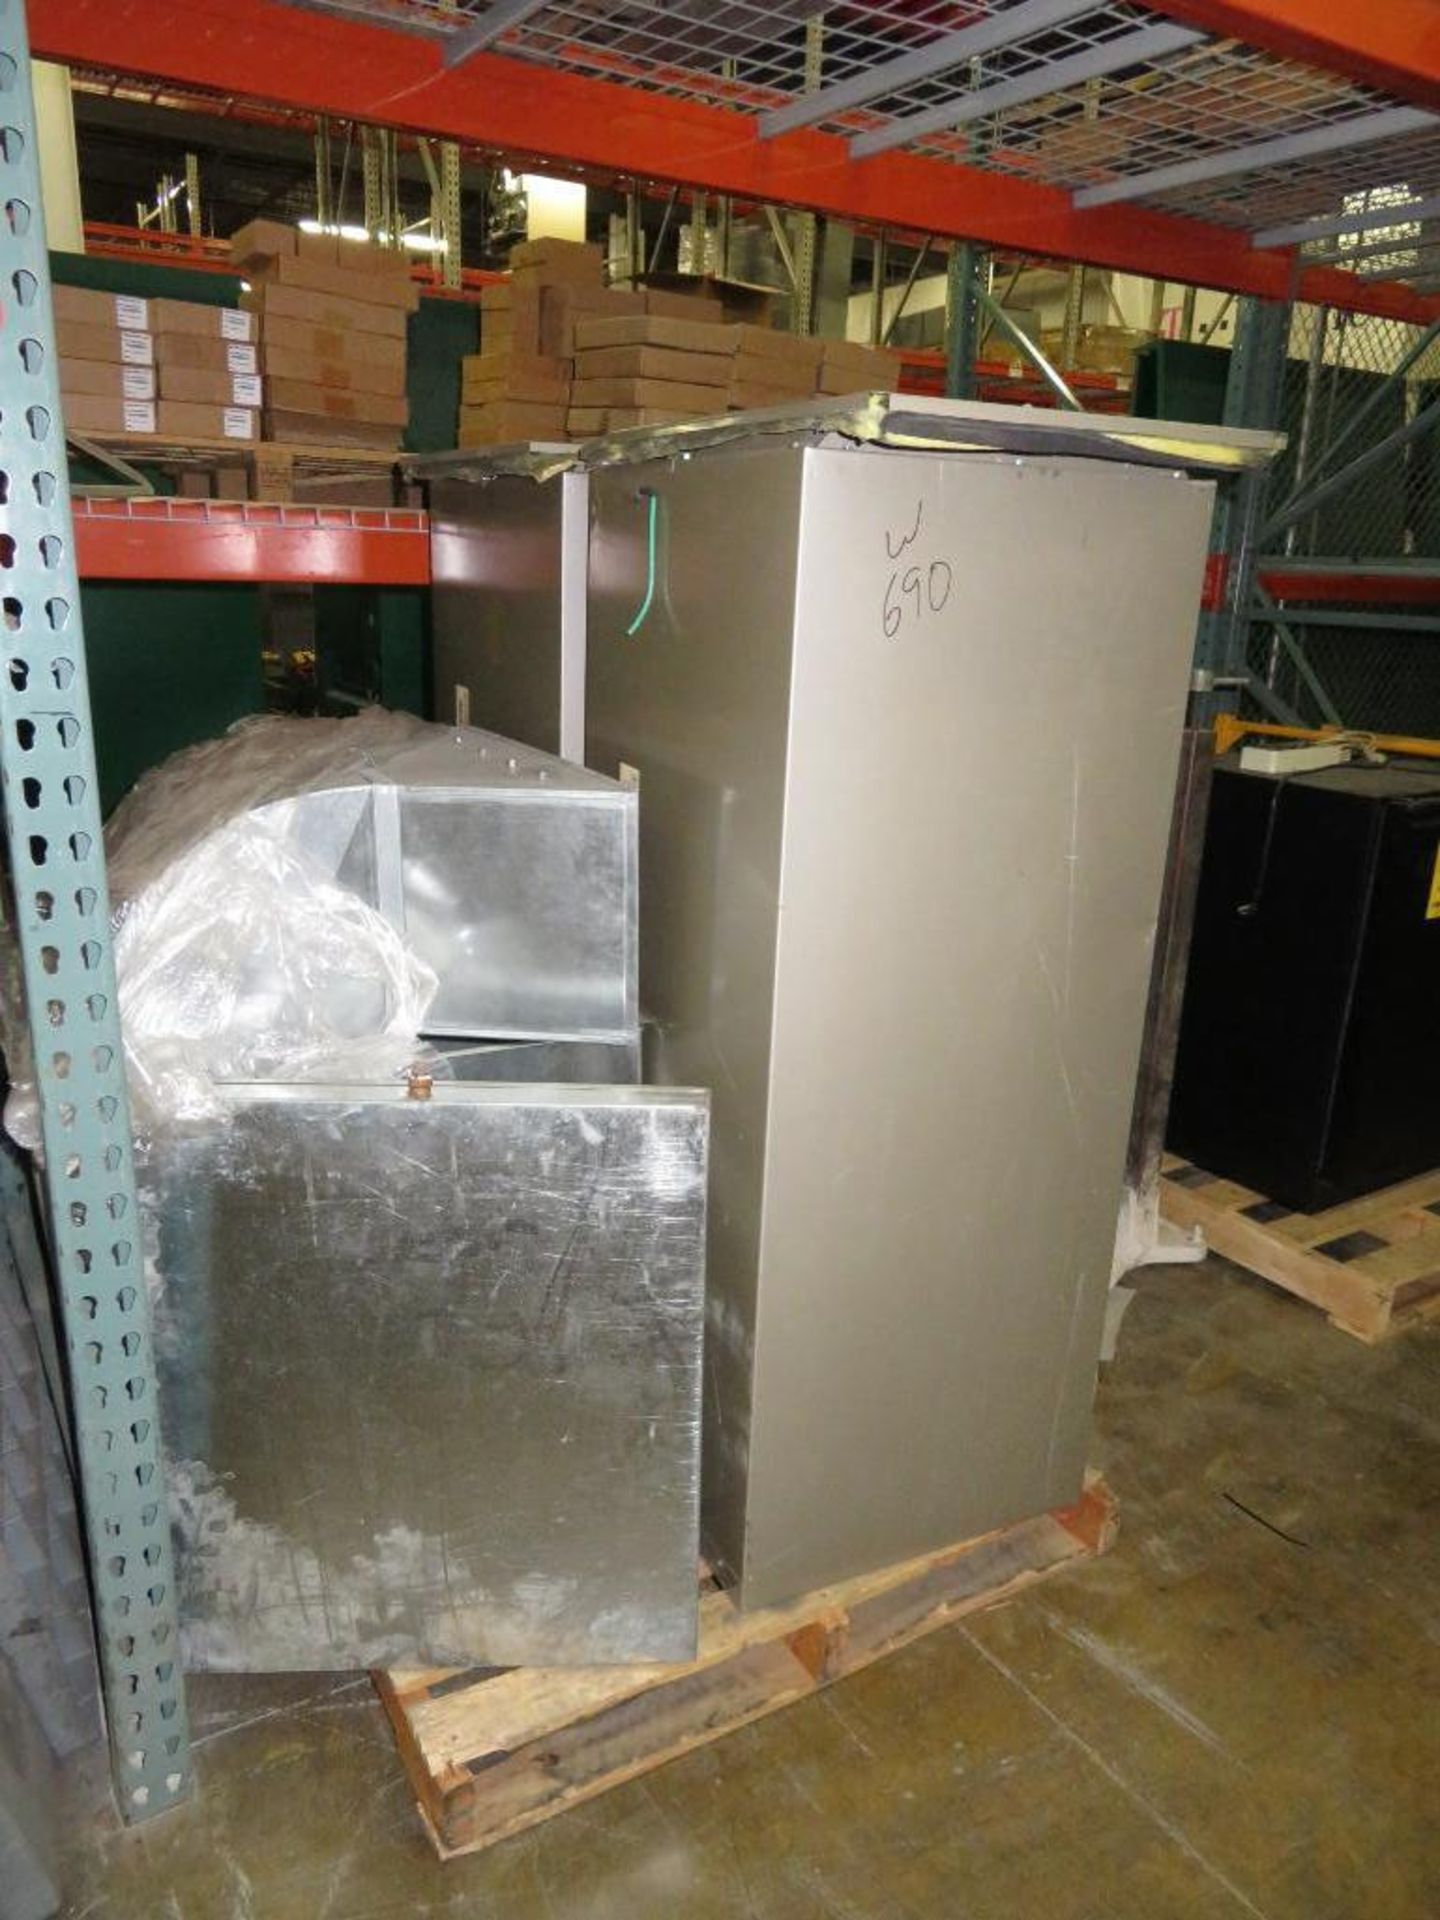 LOT: (2) Carrier A/C Units, with Ducting - Image 2 of 3